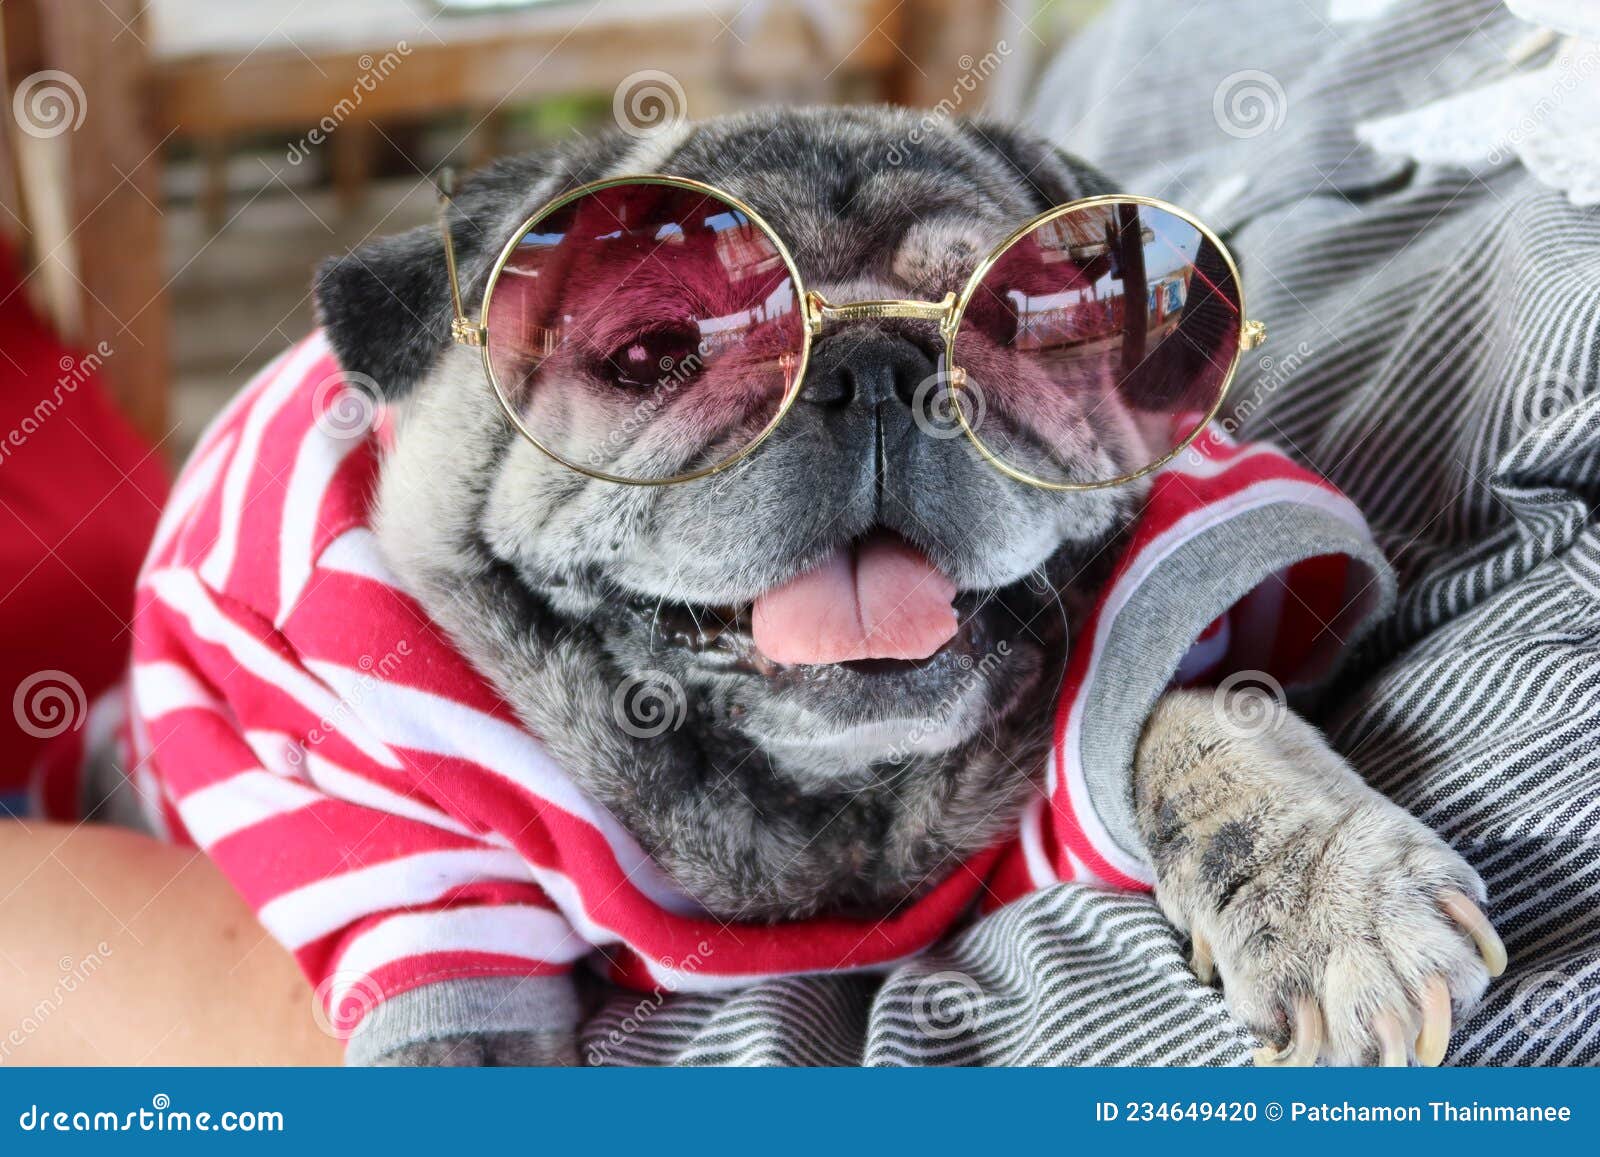 close up shot fat dog s face old smiling good mood showing teeth tongue wearing fashionable glasses 234649420